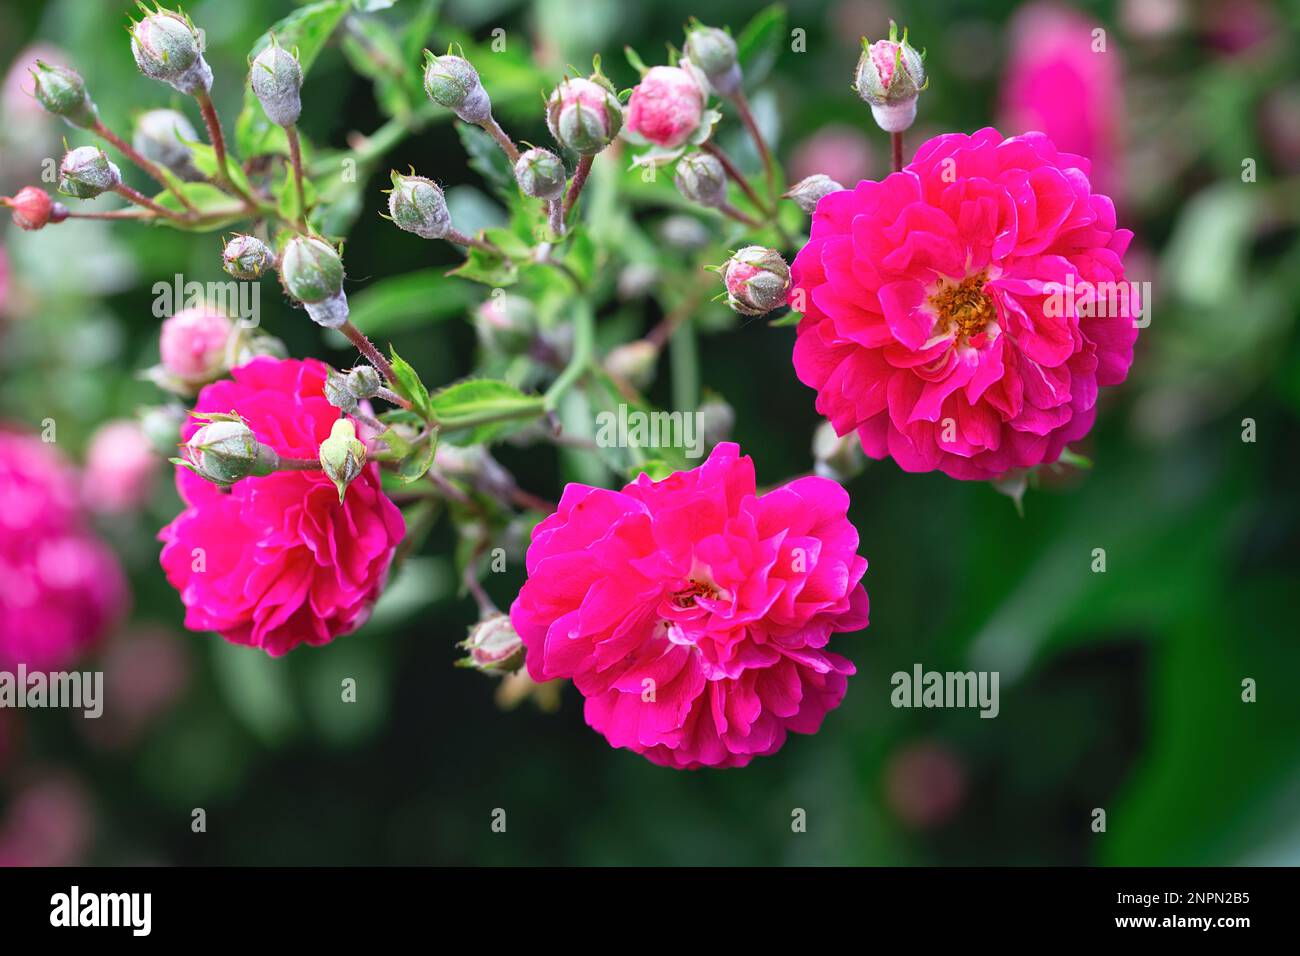 Rose bush. Pink roses in the garden. Red rose bushes in the park. Delicate flowers. A hedge of rose bushes. Natural floral background. Stock Photo